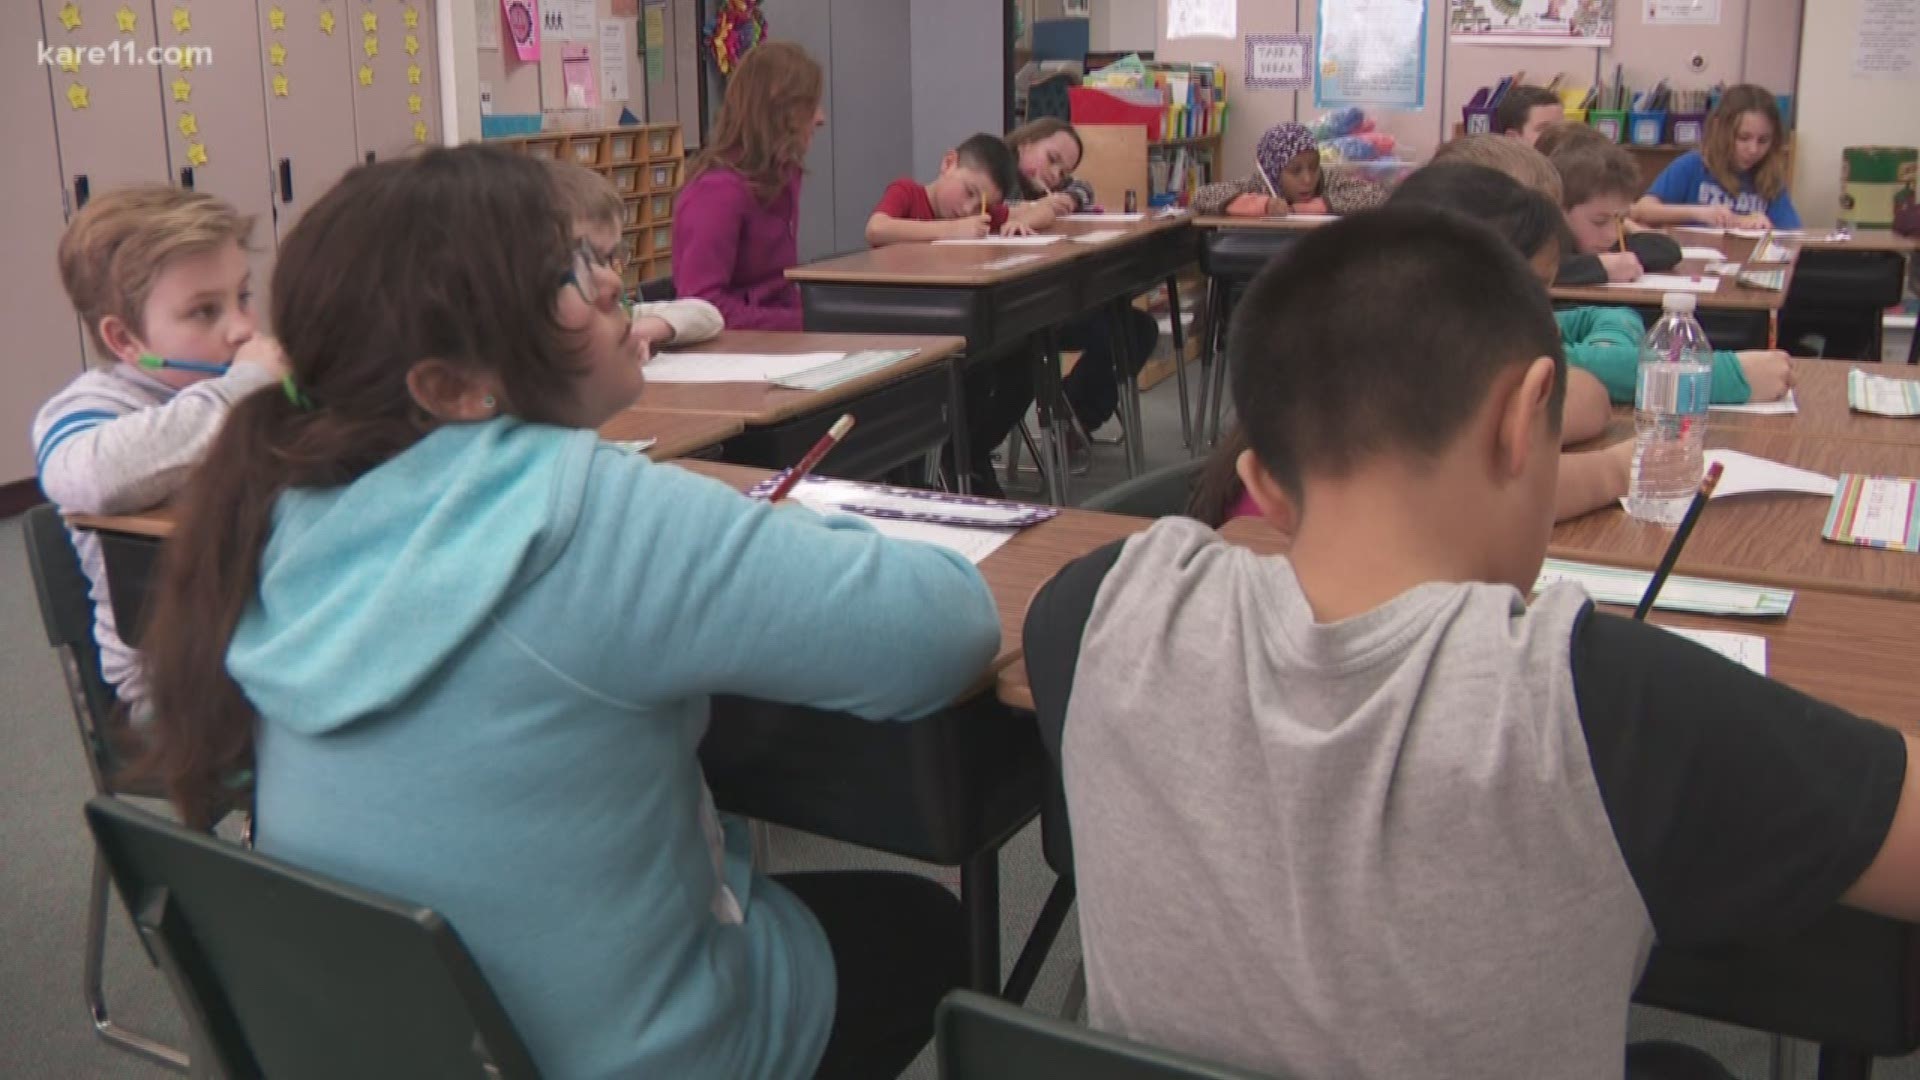 The class helped Ellery during Random Acts of Kindness week, when they wrote letters to troops. https://kare11.tv/2XxSnnl